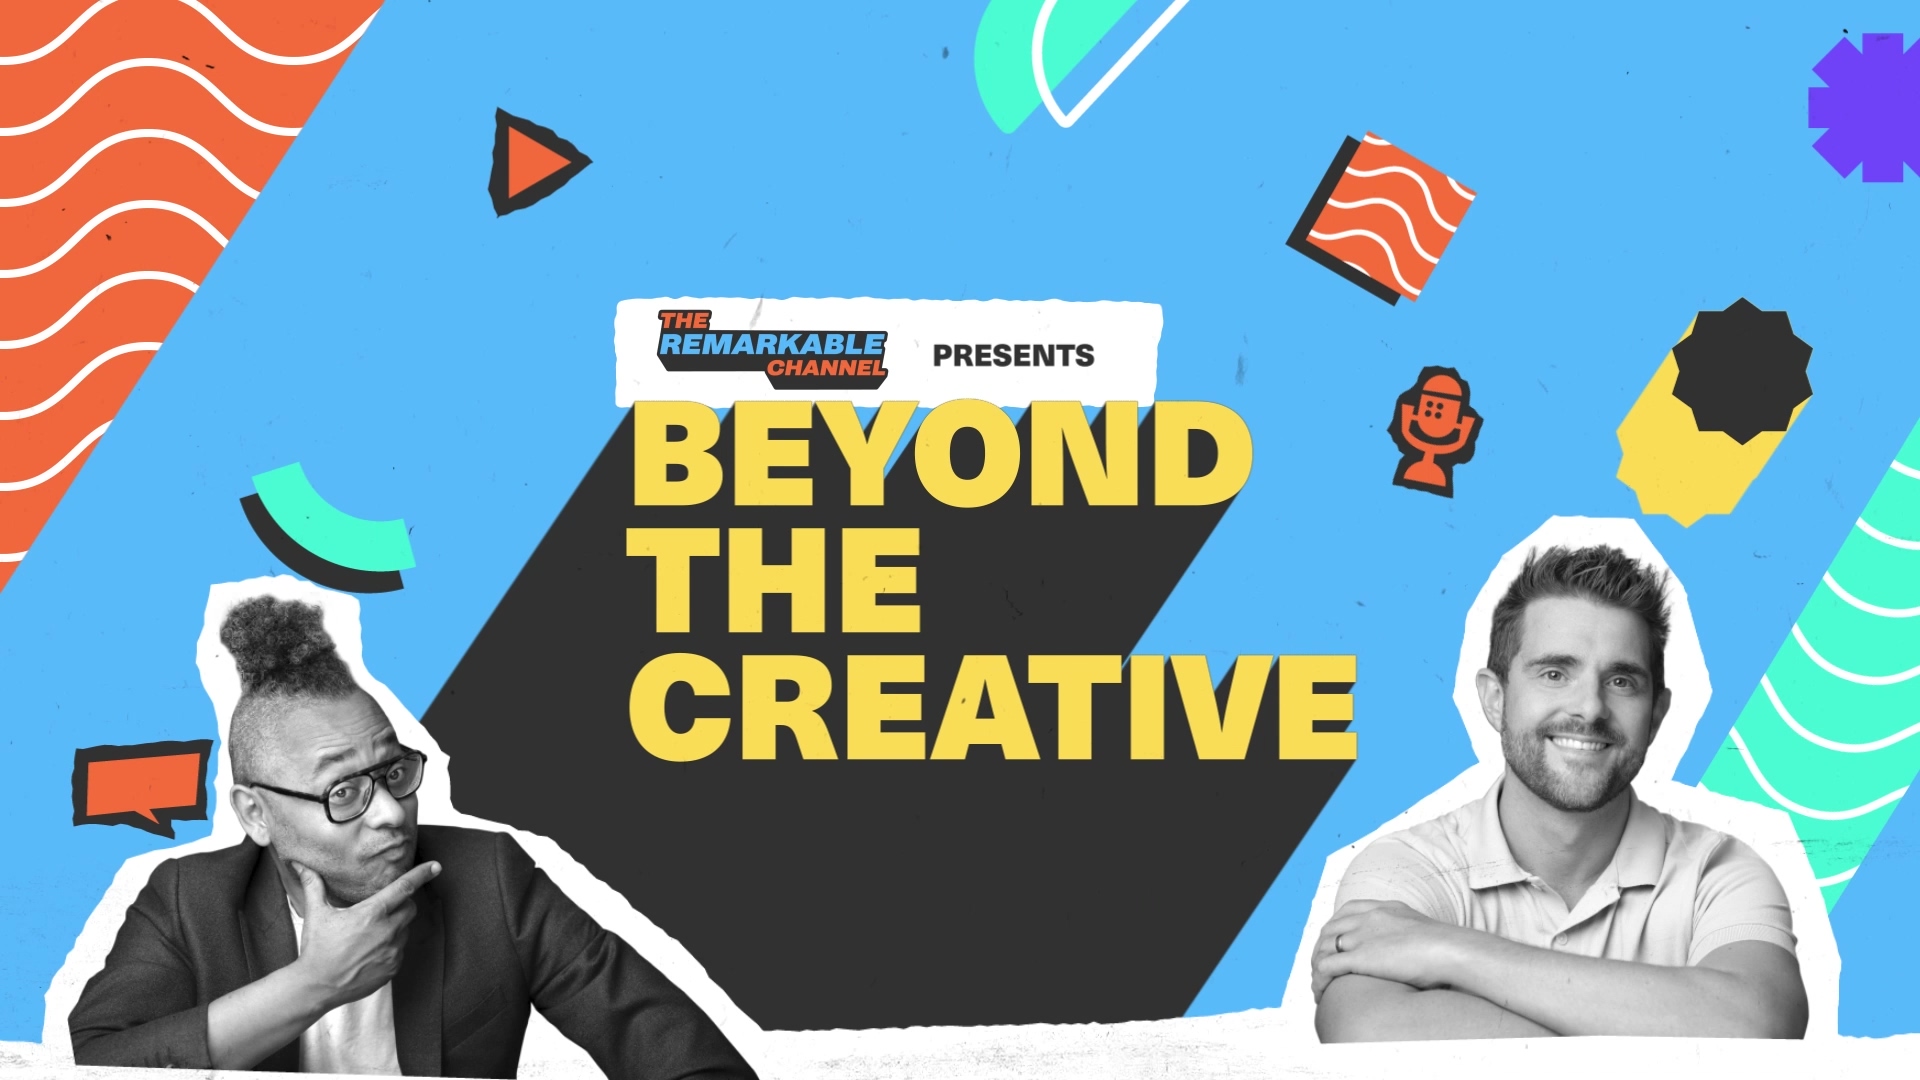 Beyond the Creative - The Remarkable Podcast